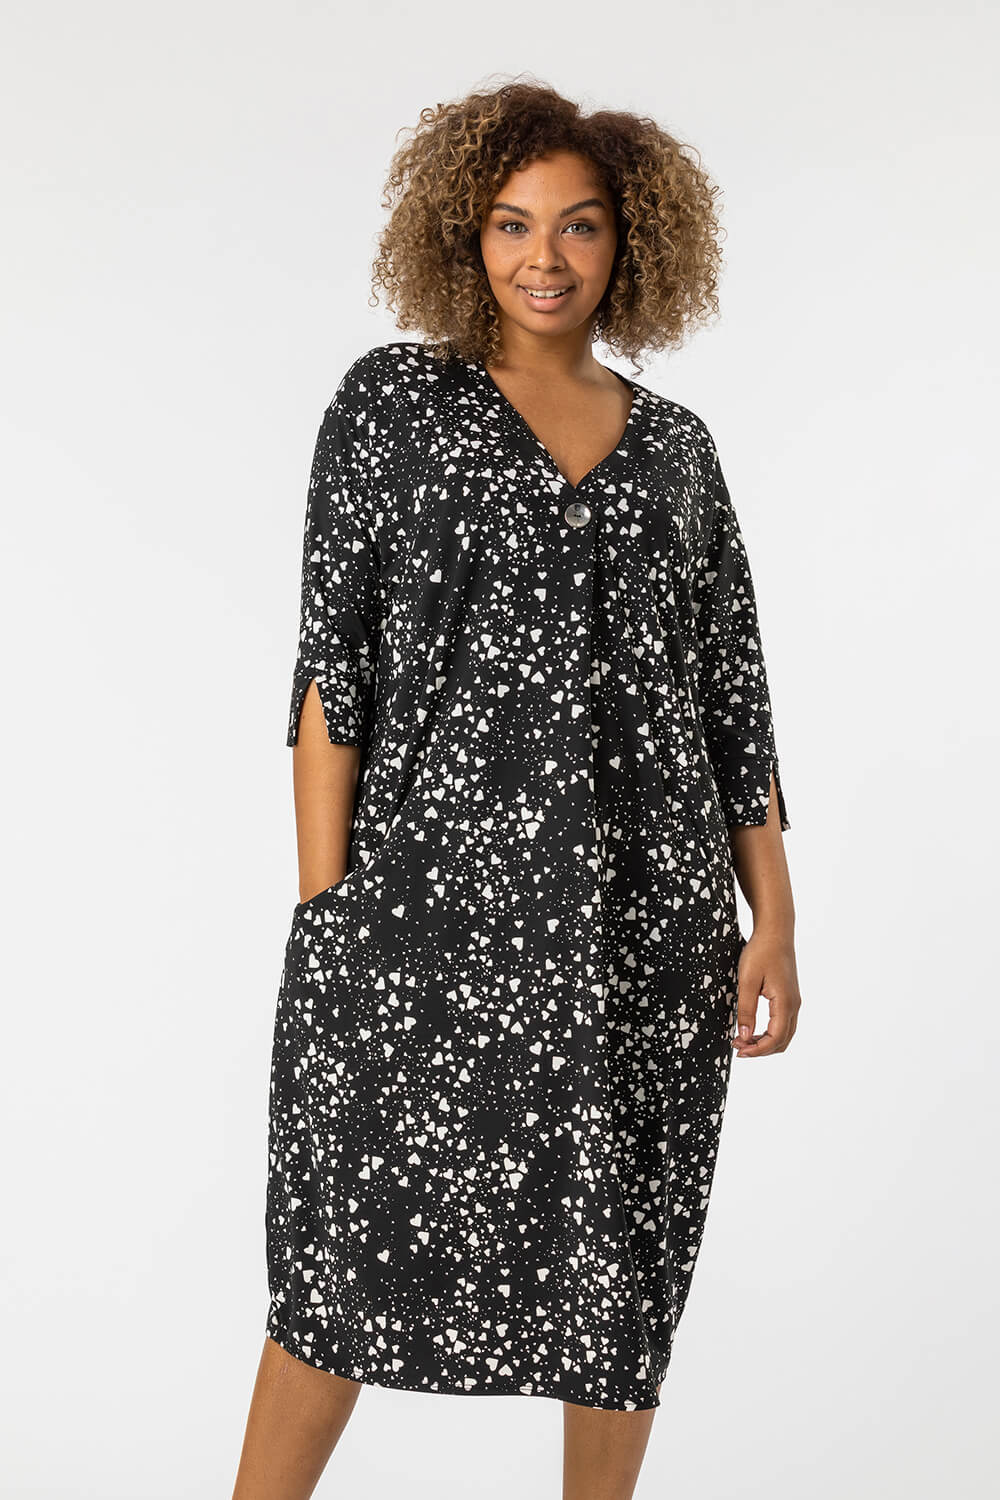 Black Curve Ditsy Heart Print Cocoon Dress, Image 3 of 4